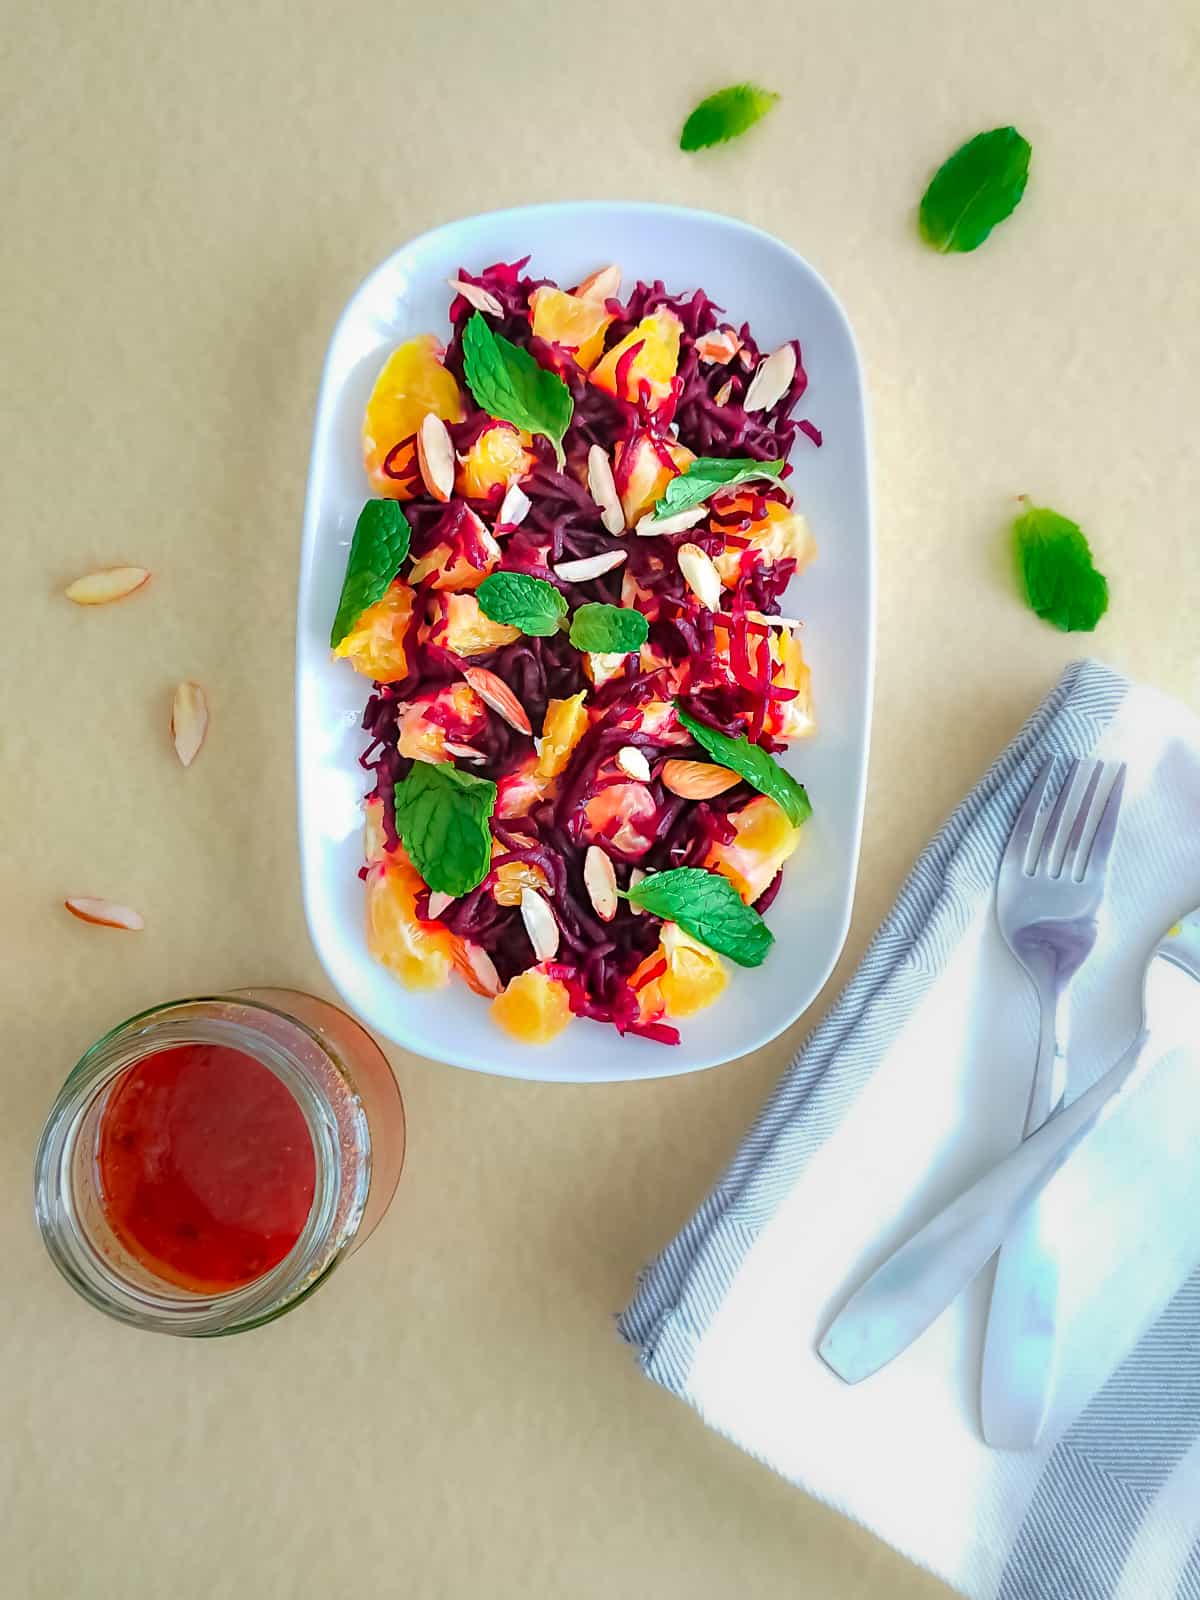 Beet and Mandarin Orange Salad with Mint in a white plate and a jar of citrus ginger dressing.